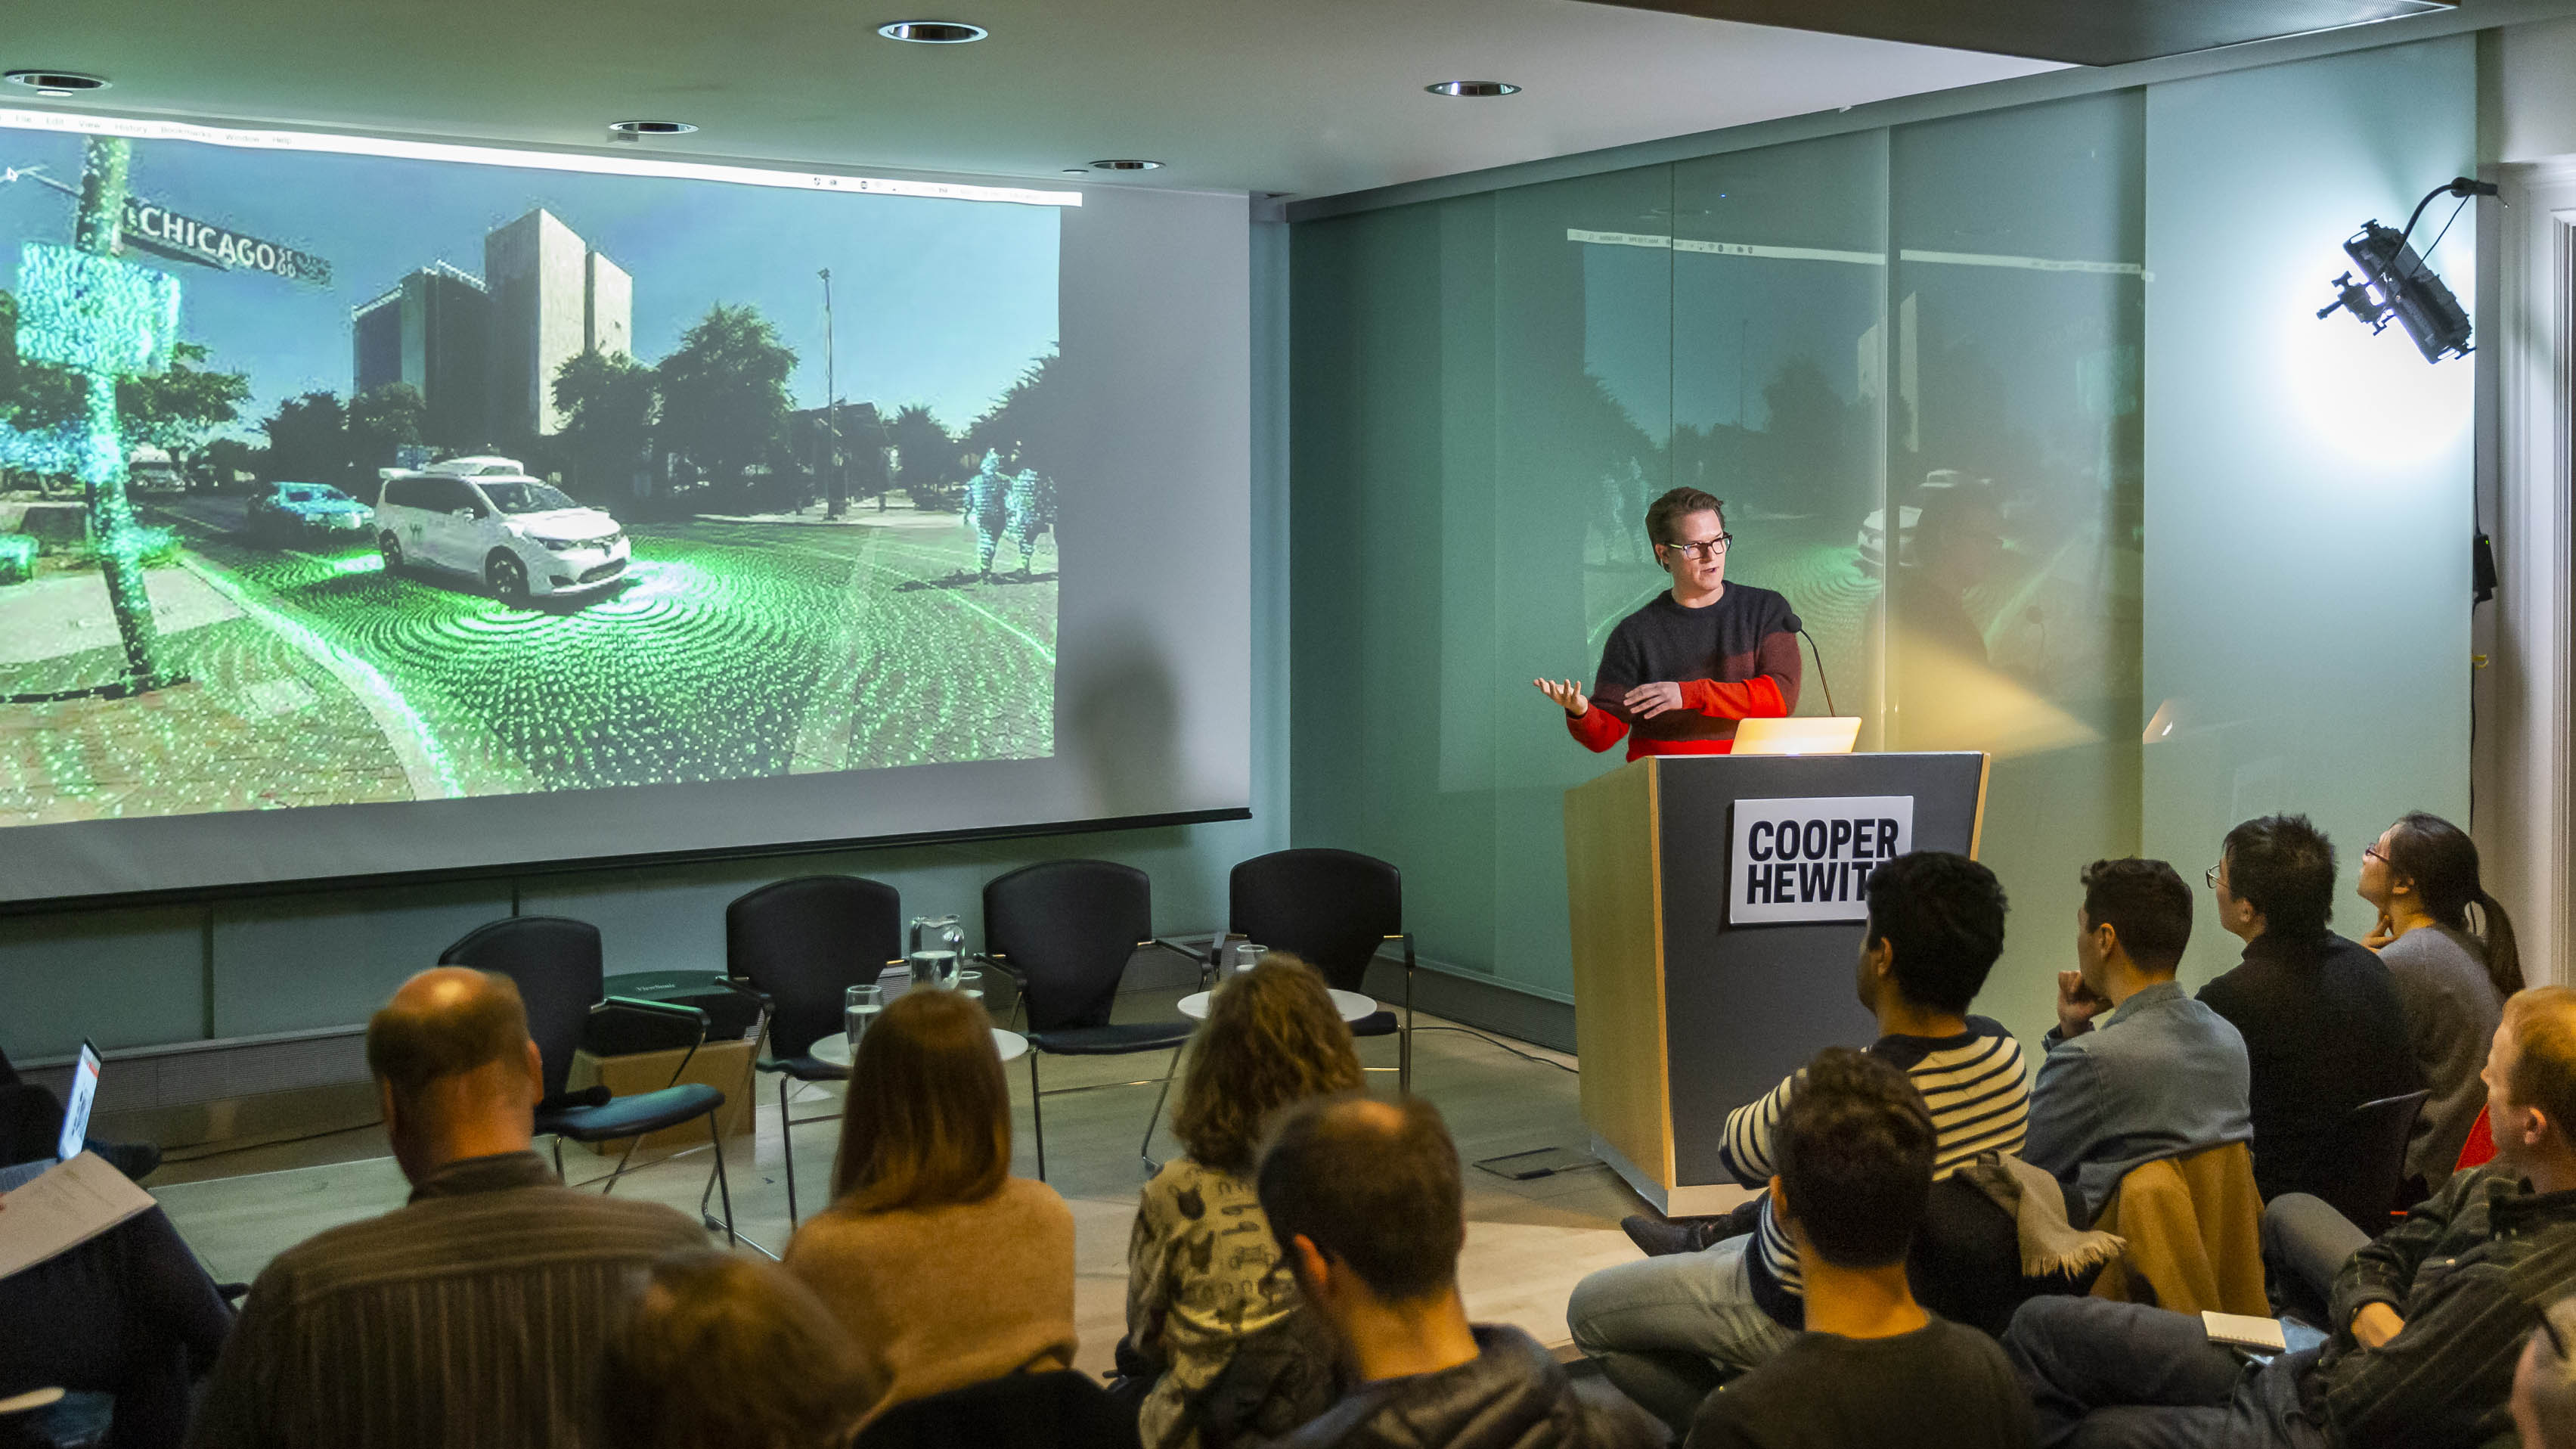 Image of Ryan Powell, head of research and UX design, Waymo behind a podium with a Cooper Hewitt sign. He has brown hair and glasses, and wears a red and blue striped sweater. His hands are raise slightly, gesturing to an image on a screen behind him. The crowd looks on.